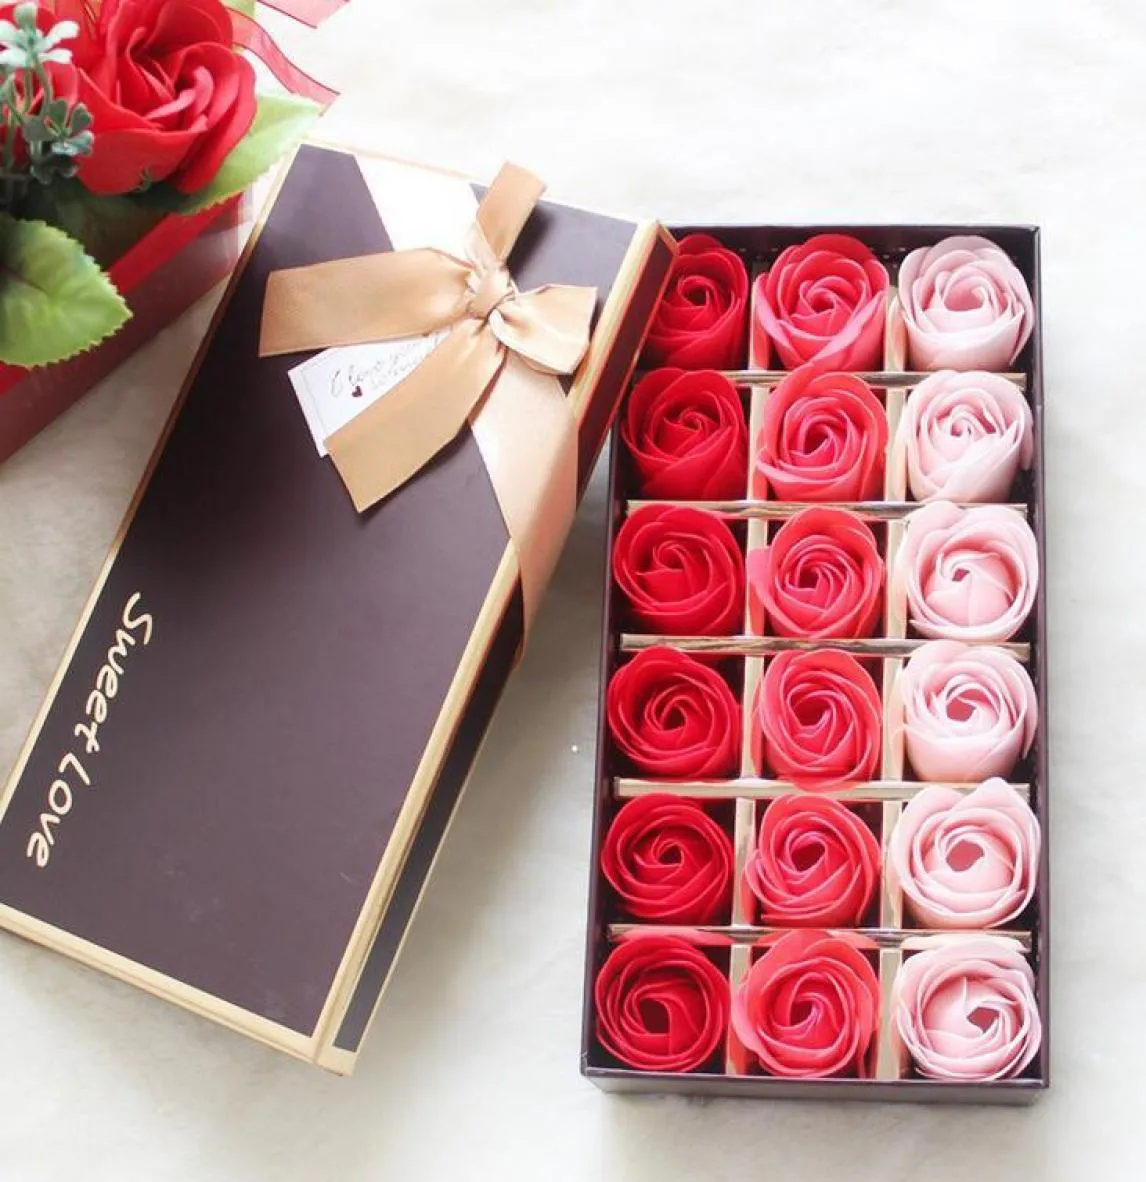 18PCS Rose Soaps Flower Packed Wedding Supplies Gifts Event Party Goods Favor Toilet soap Scented bathroom accessories3328238